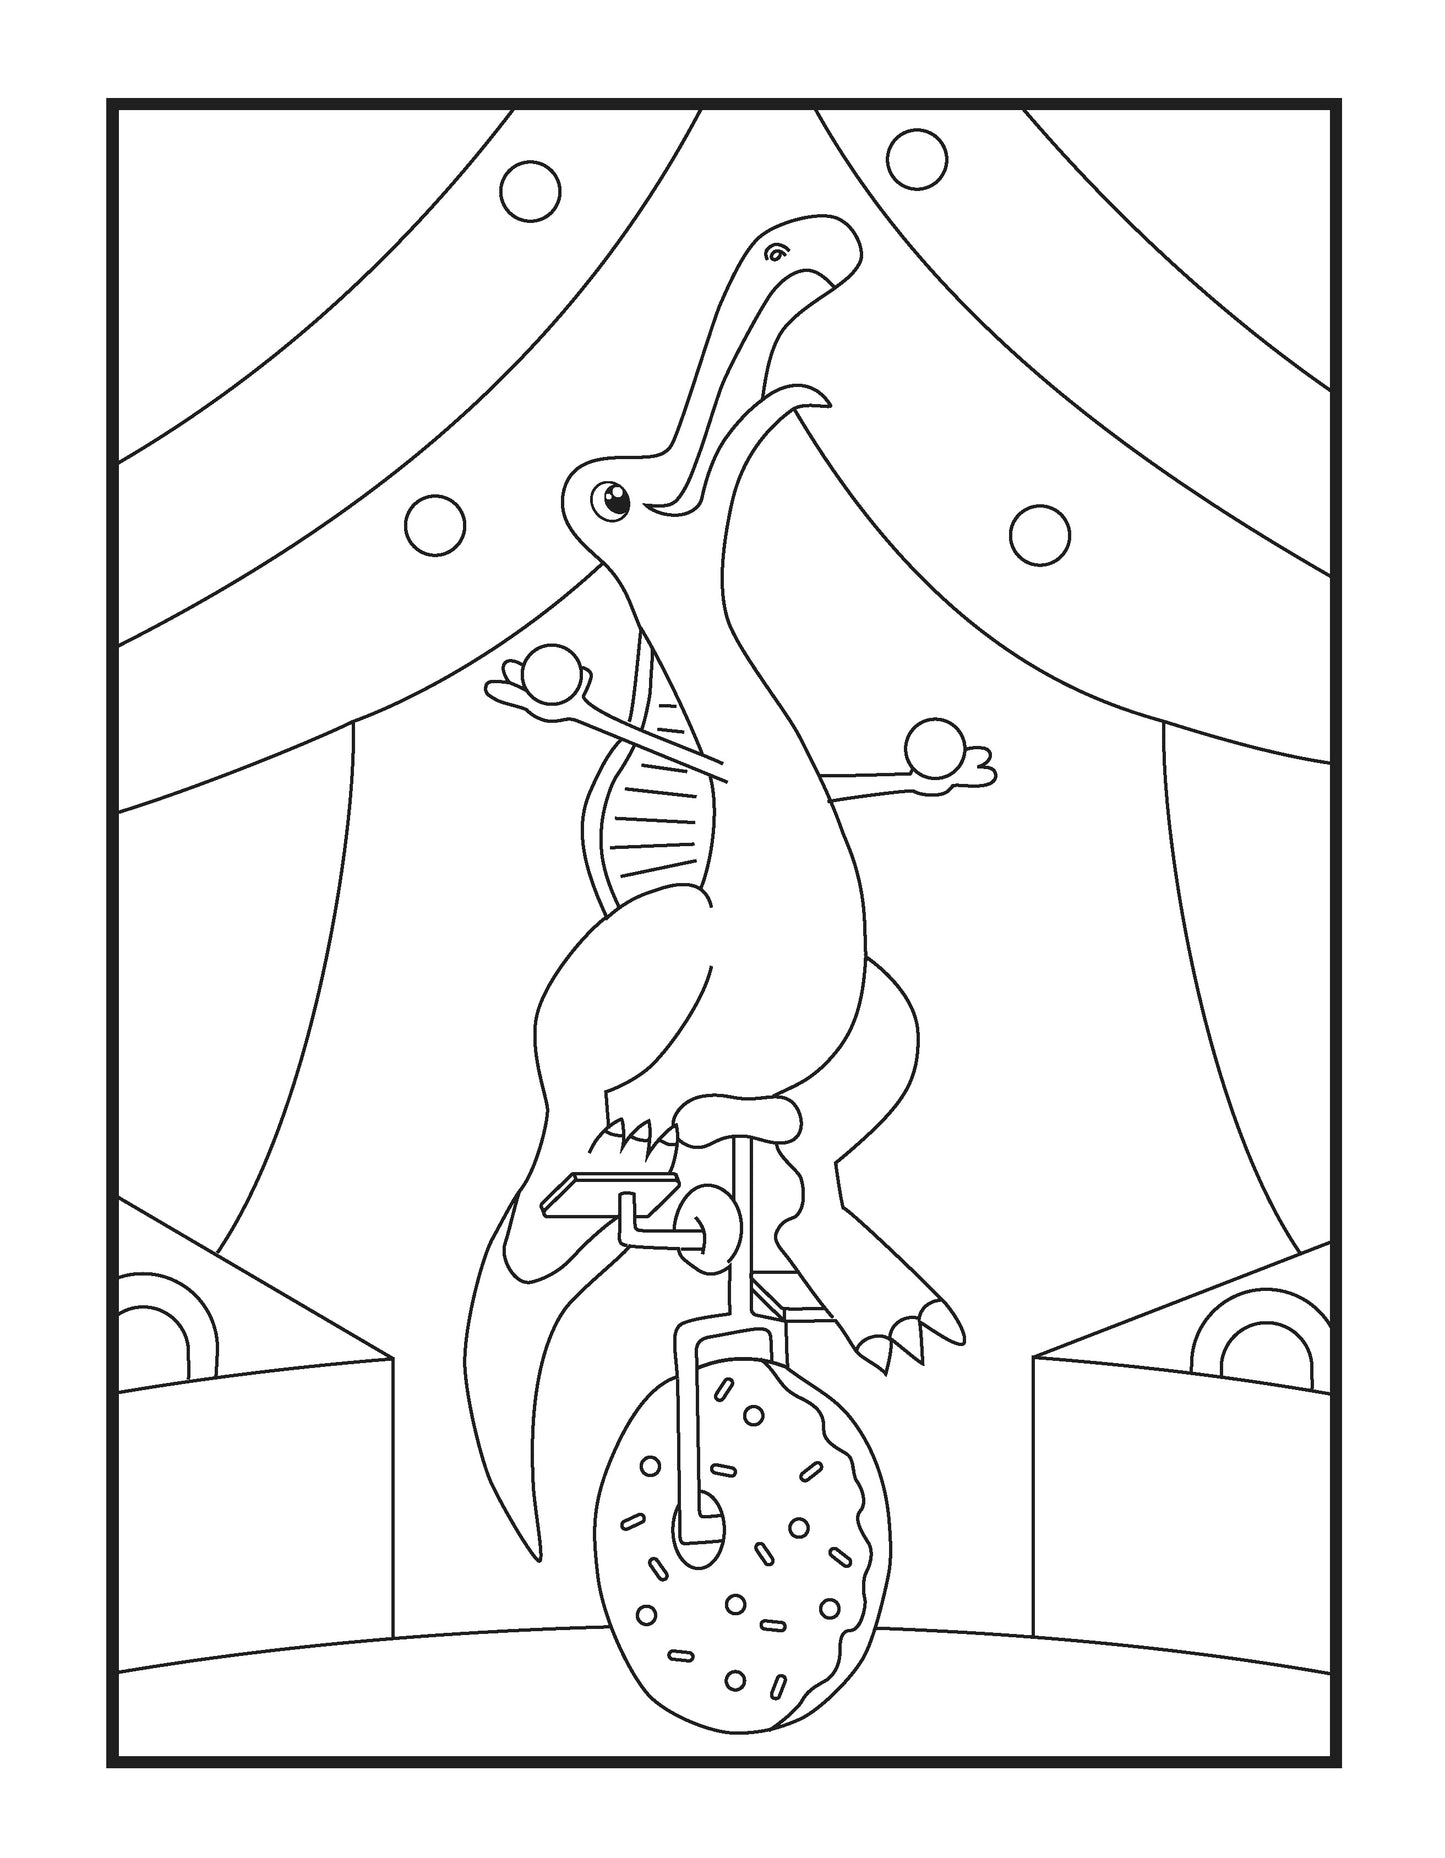 A whimsical coloring page presents a dinosaur balancing on a unicycle under a circus tent. The creature, with a playful grin, performs with arms stretched wide and one leg lifted for balance. Its ribs are humorously visible, adding to the cartoonish charm. The tent is draped with curtains, evoking a classic circus atmosphere. This imaginative scene is designed to capture the joy of the circus and spark creativity in children.